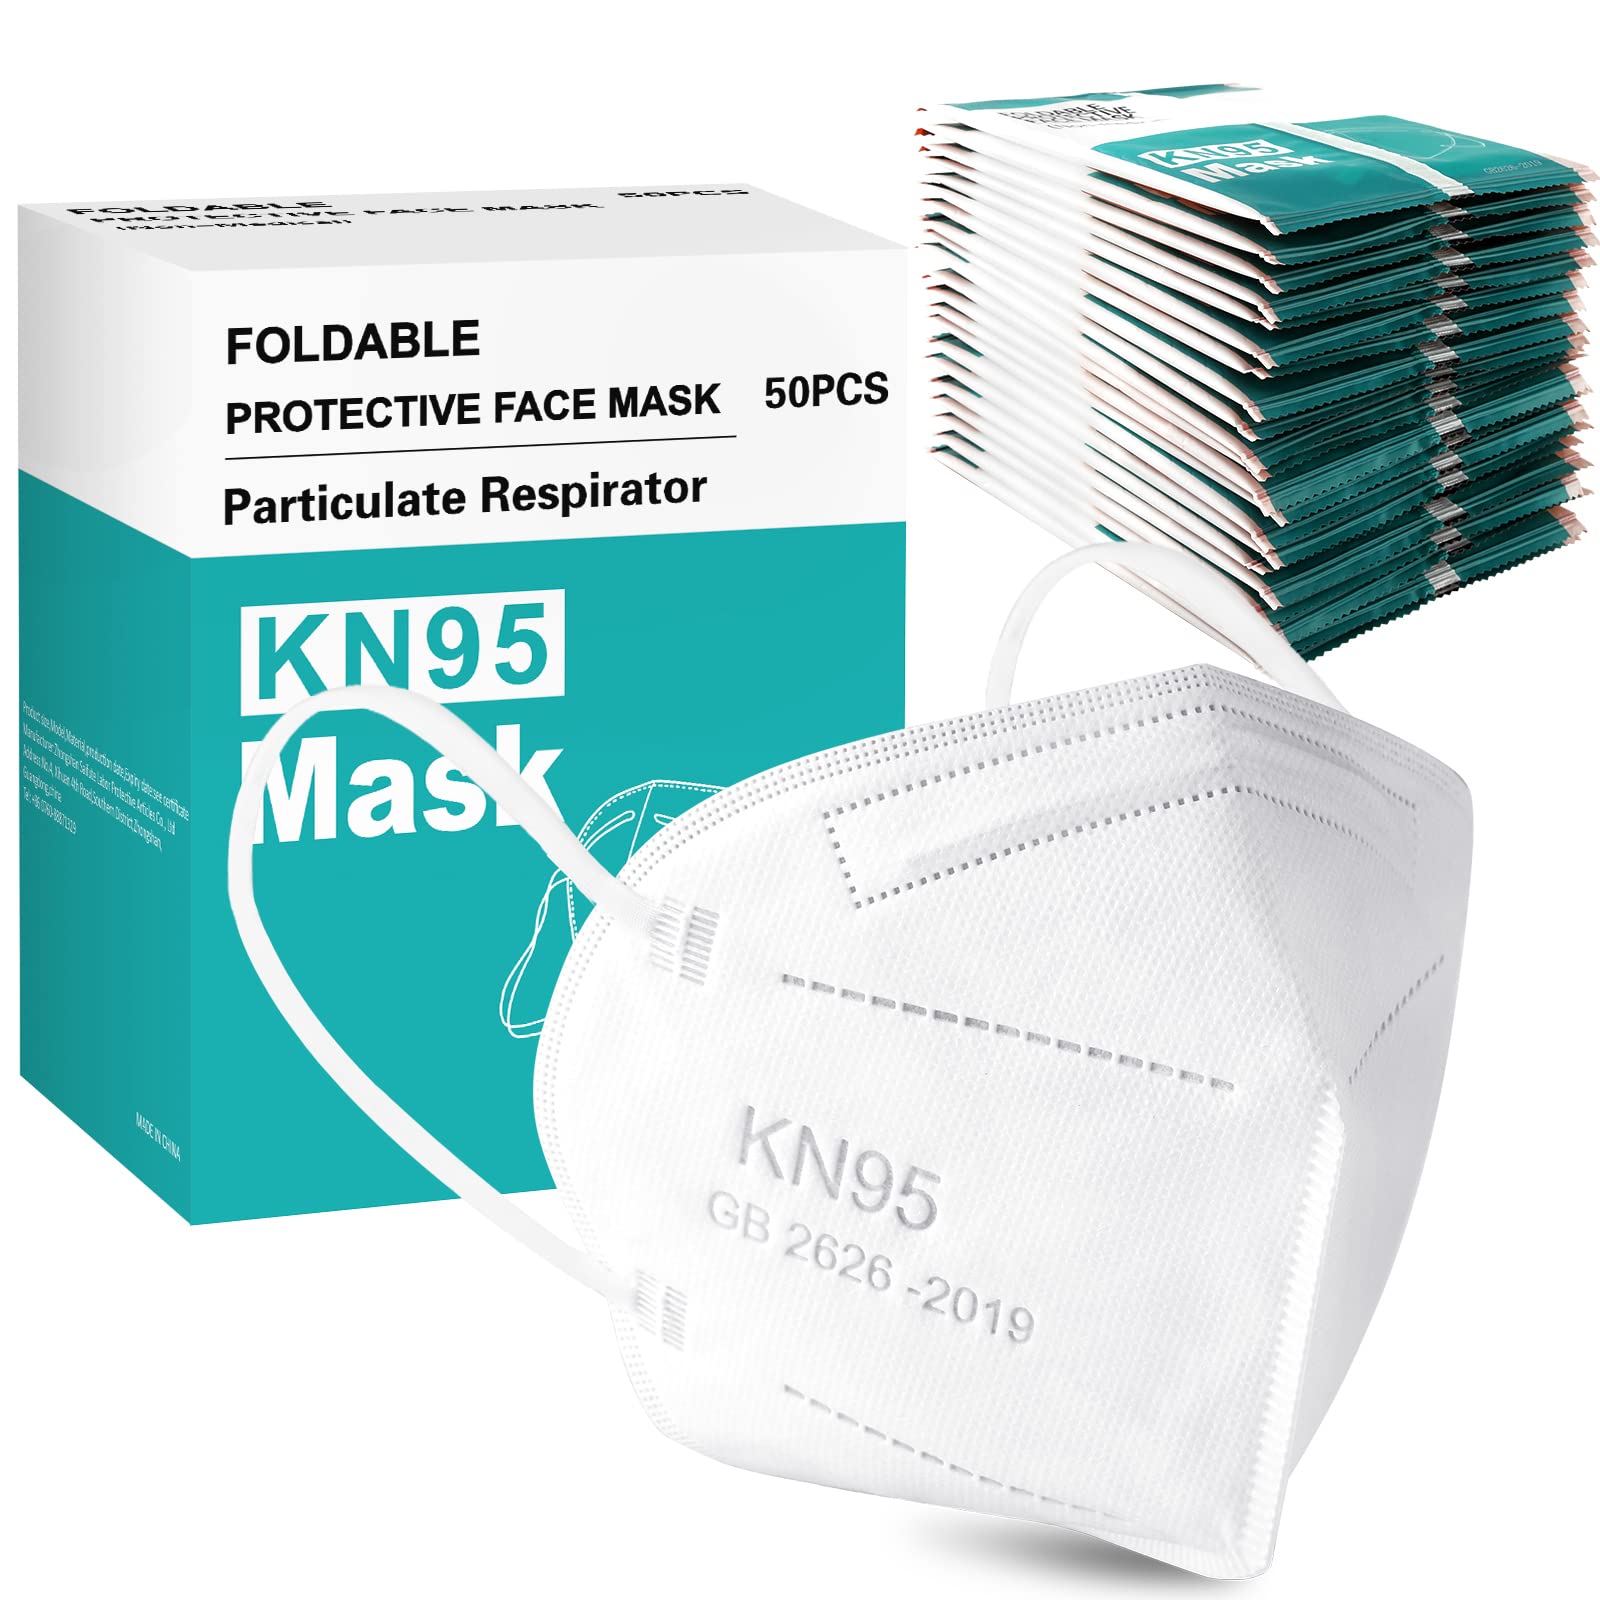 Kn95 Face Masks 50 pack, Individually Wrapped Cup Dust Safety Masks 5 Layer Protection Mask for Adult, Men, Women, Indoor, Outdoor Use, White